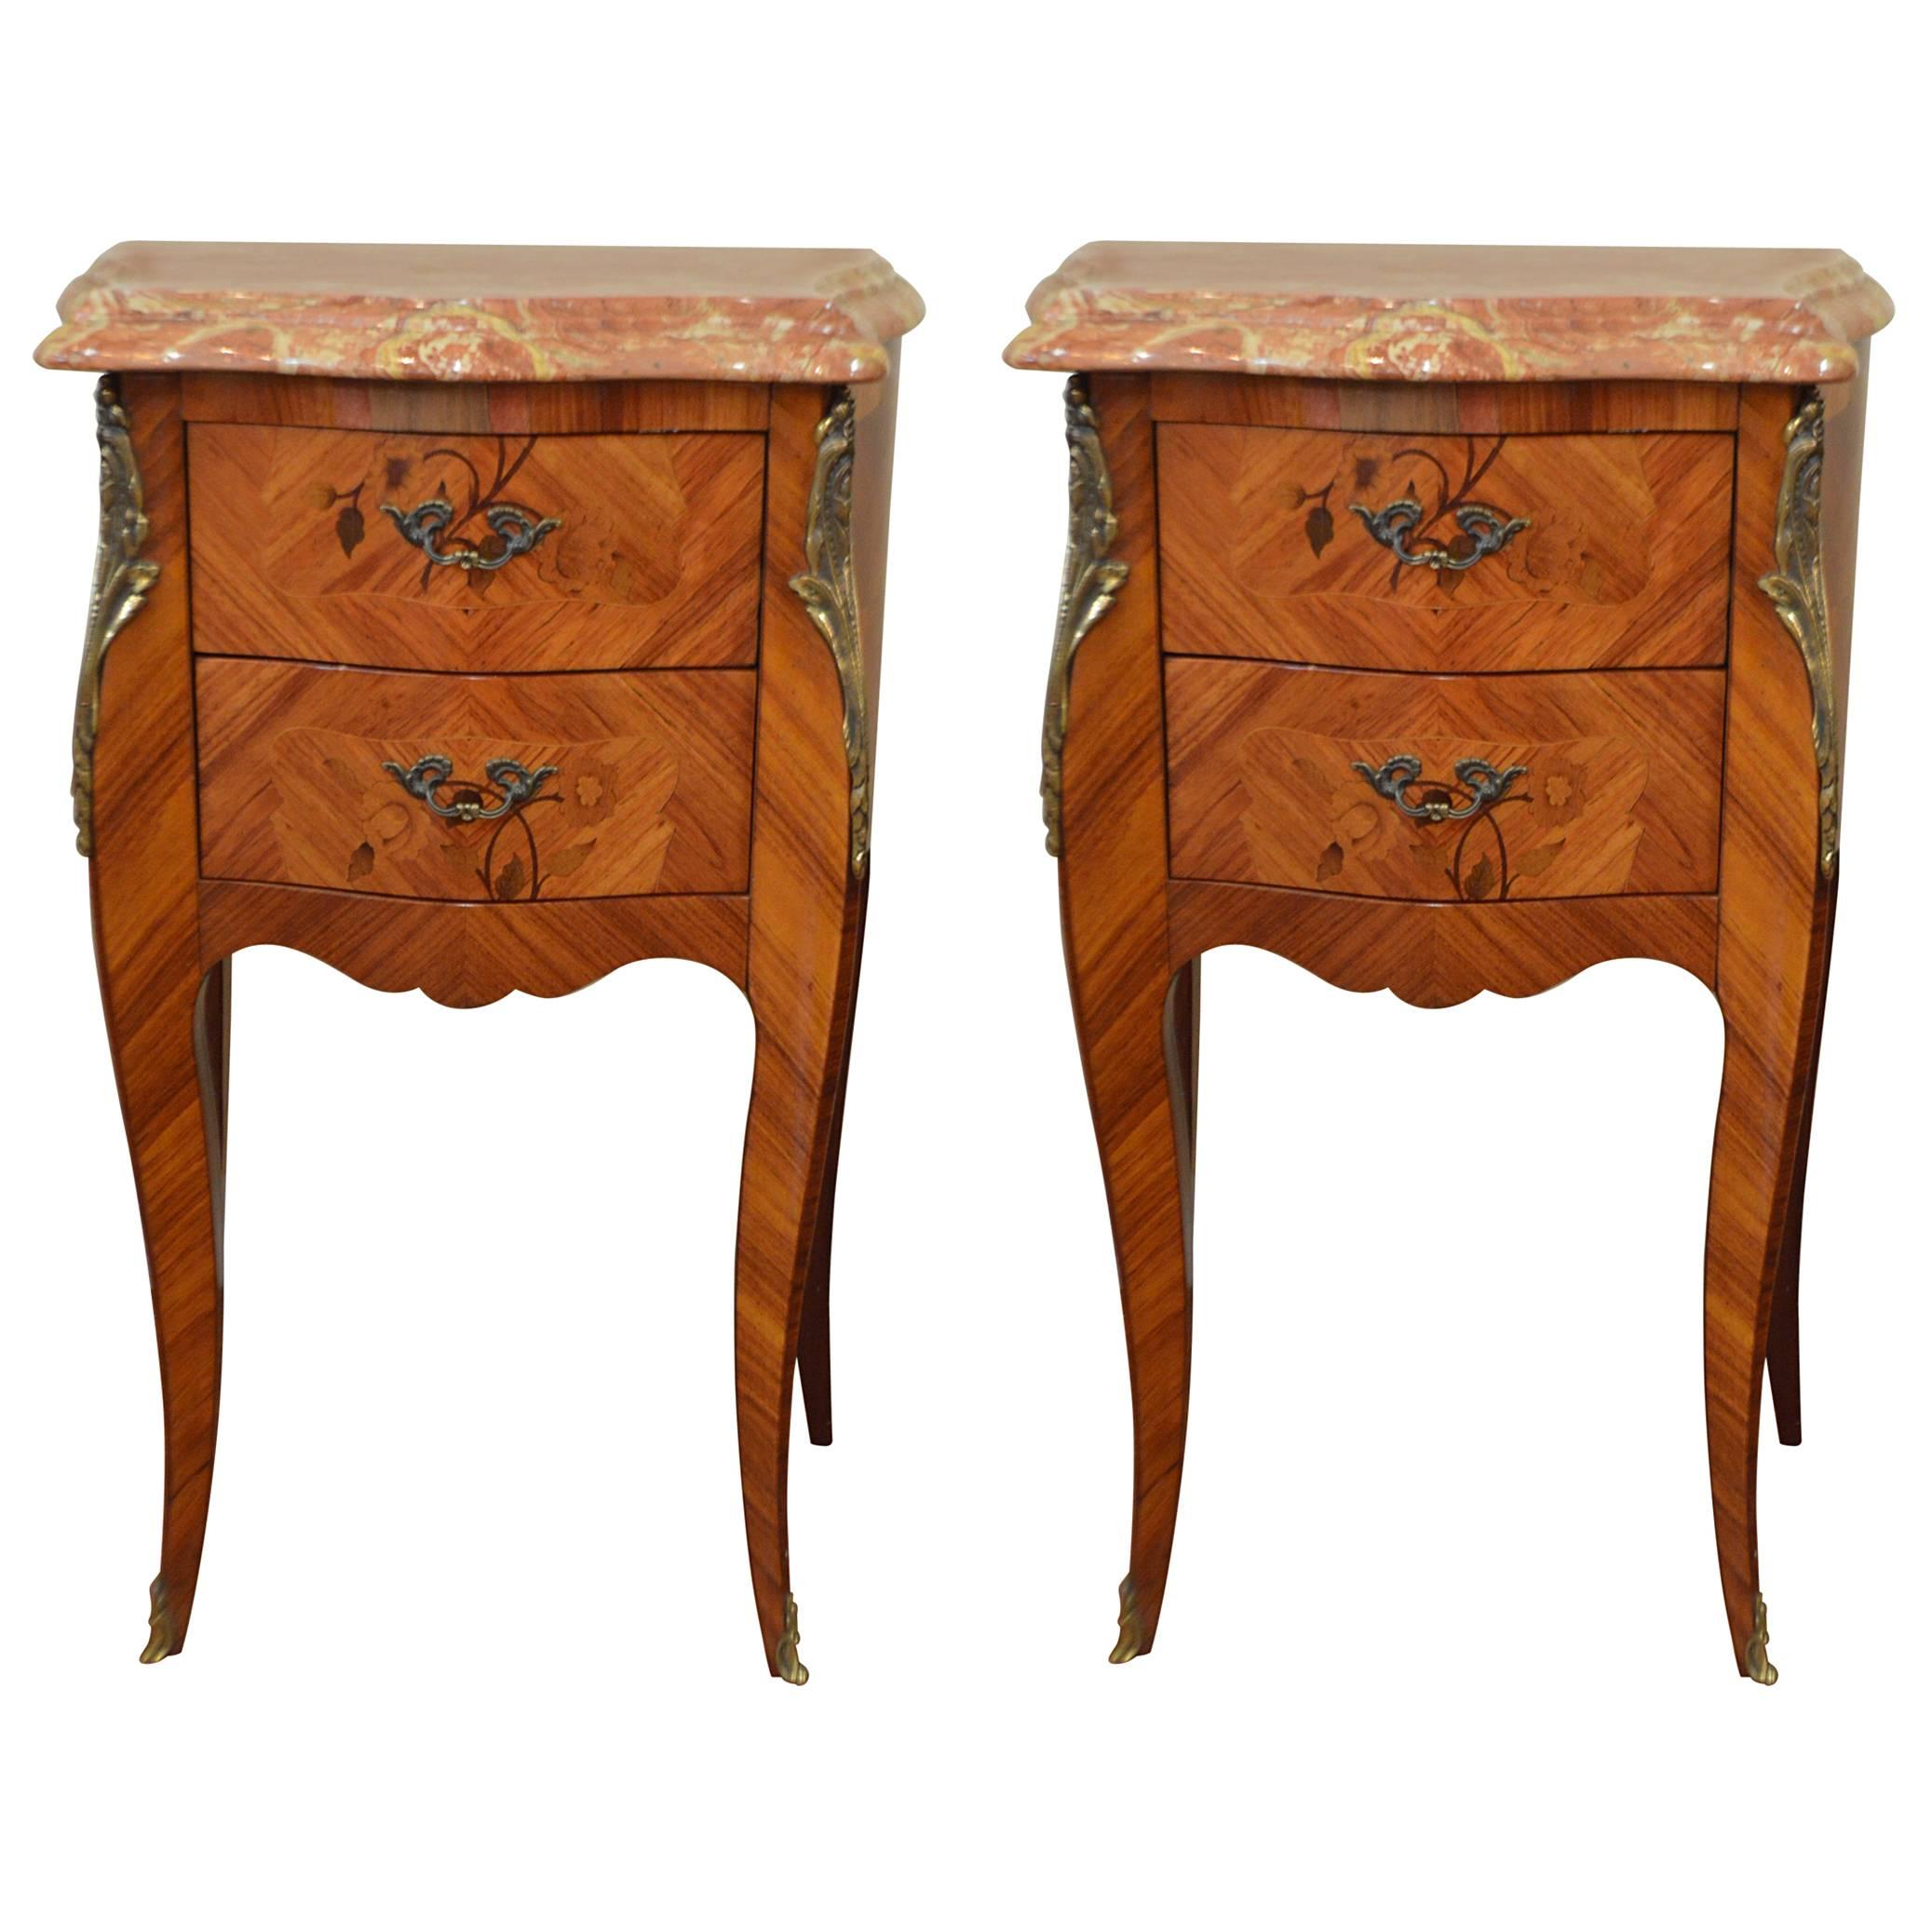 Pair of Louis XV Style Inlay Side Tables, Two Drawers and Marble Topsop